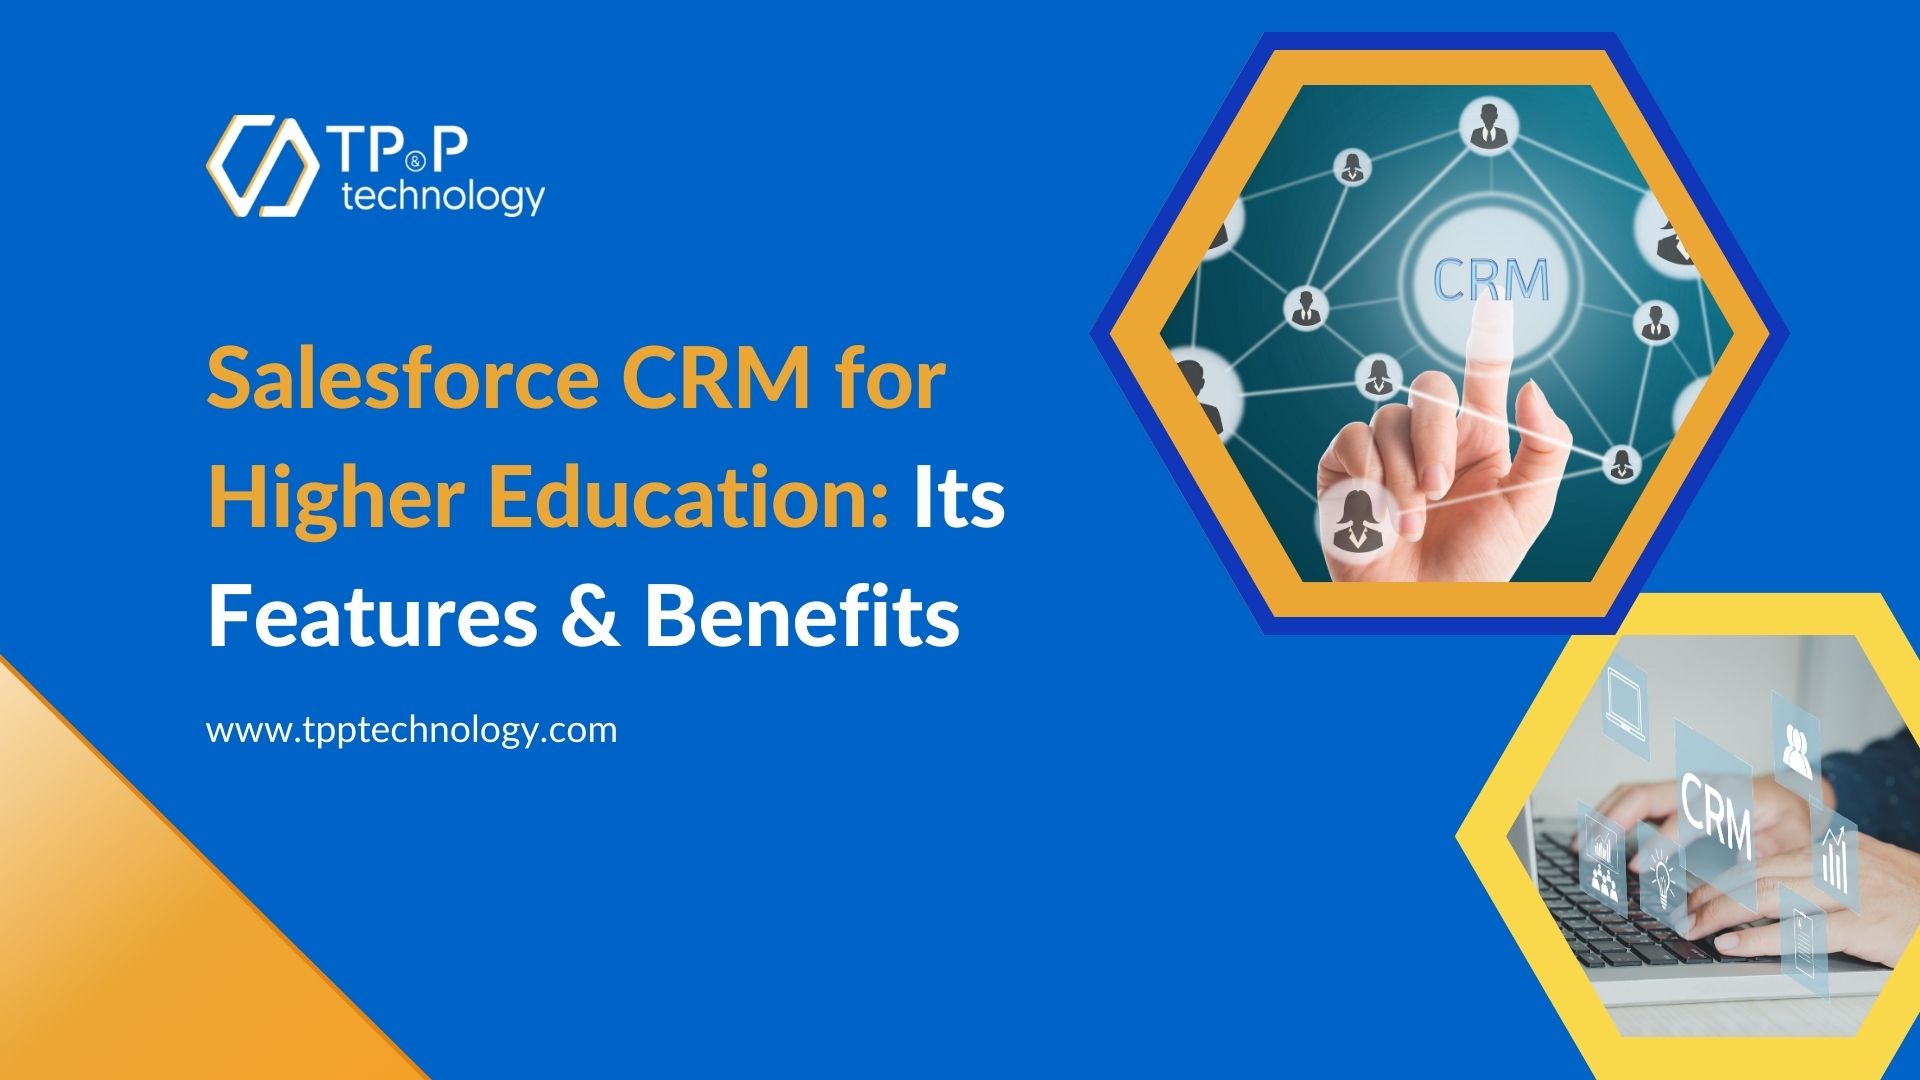 Salesforce CRM for Higher Education: Its Features & Benefits